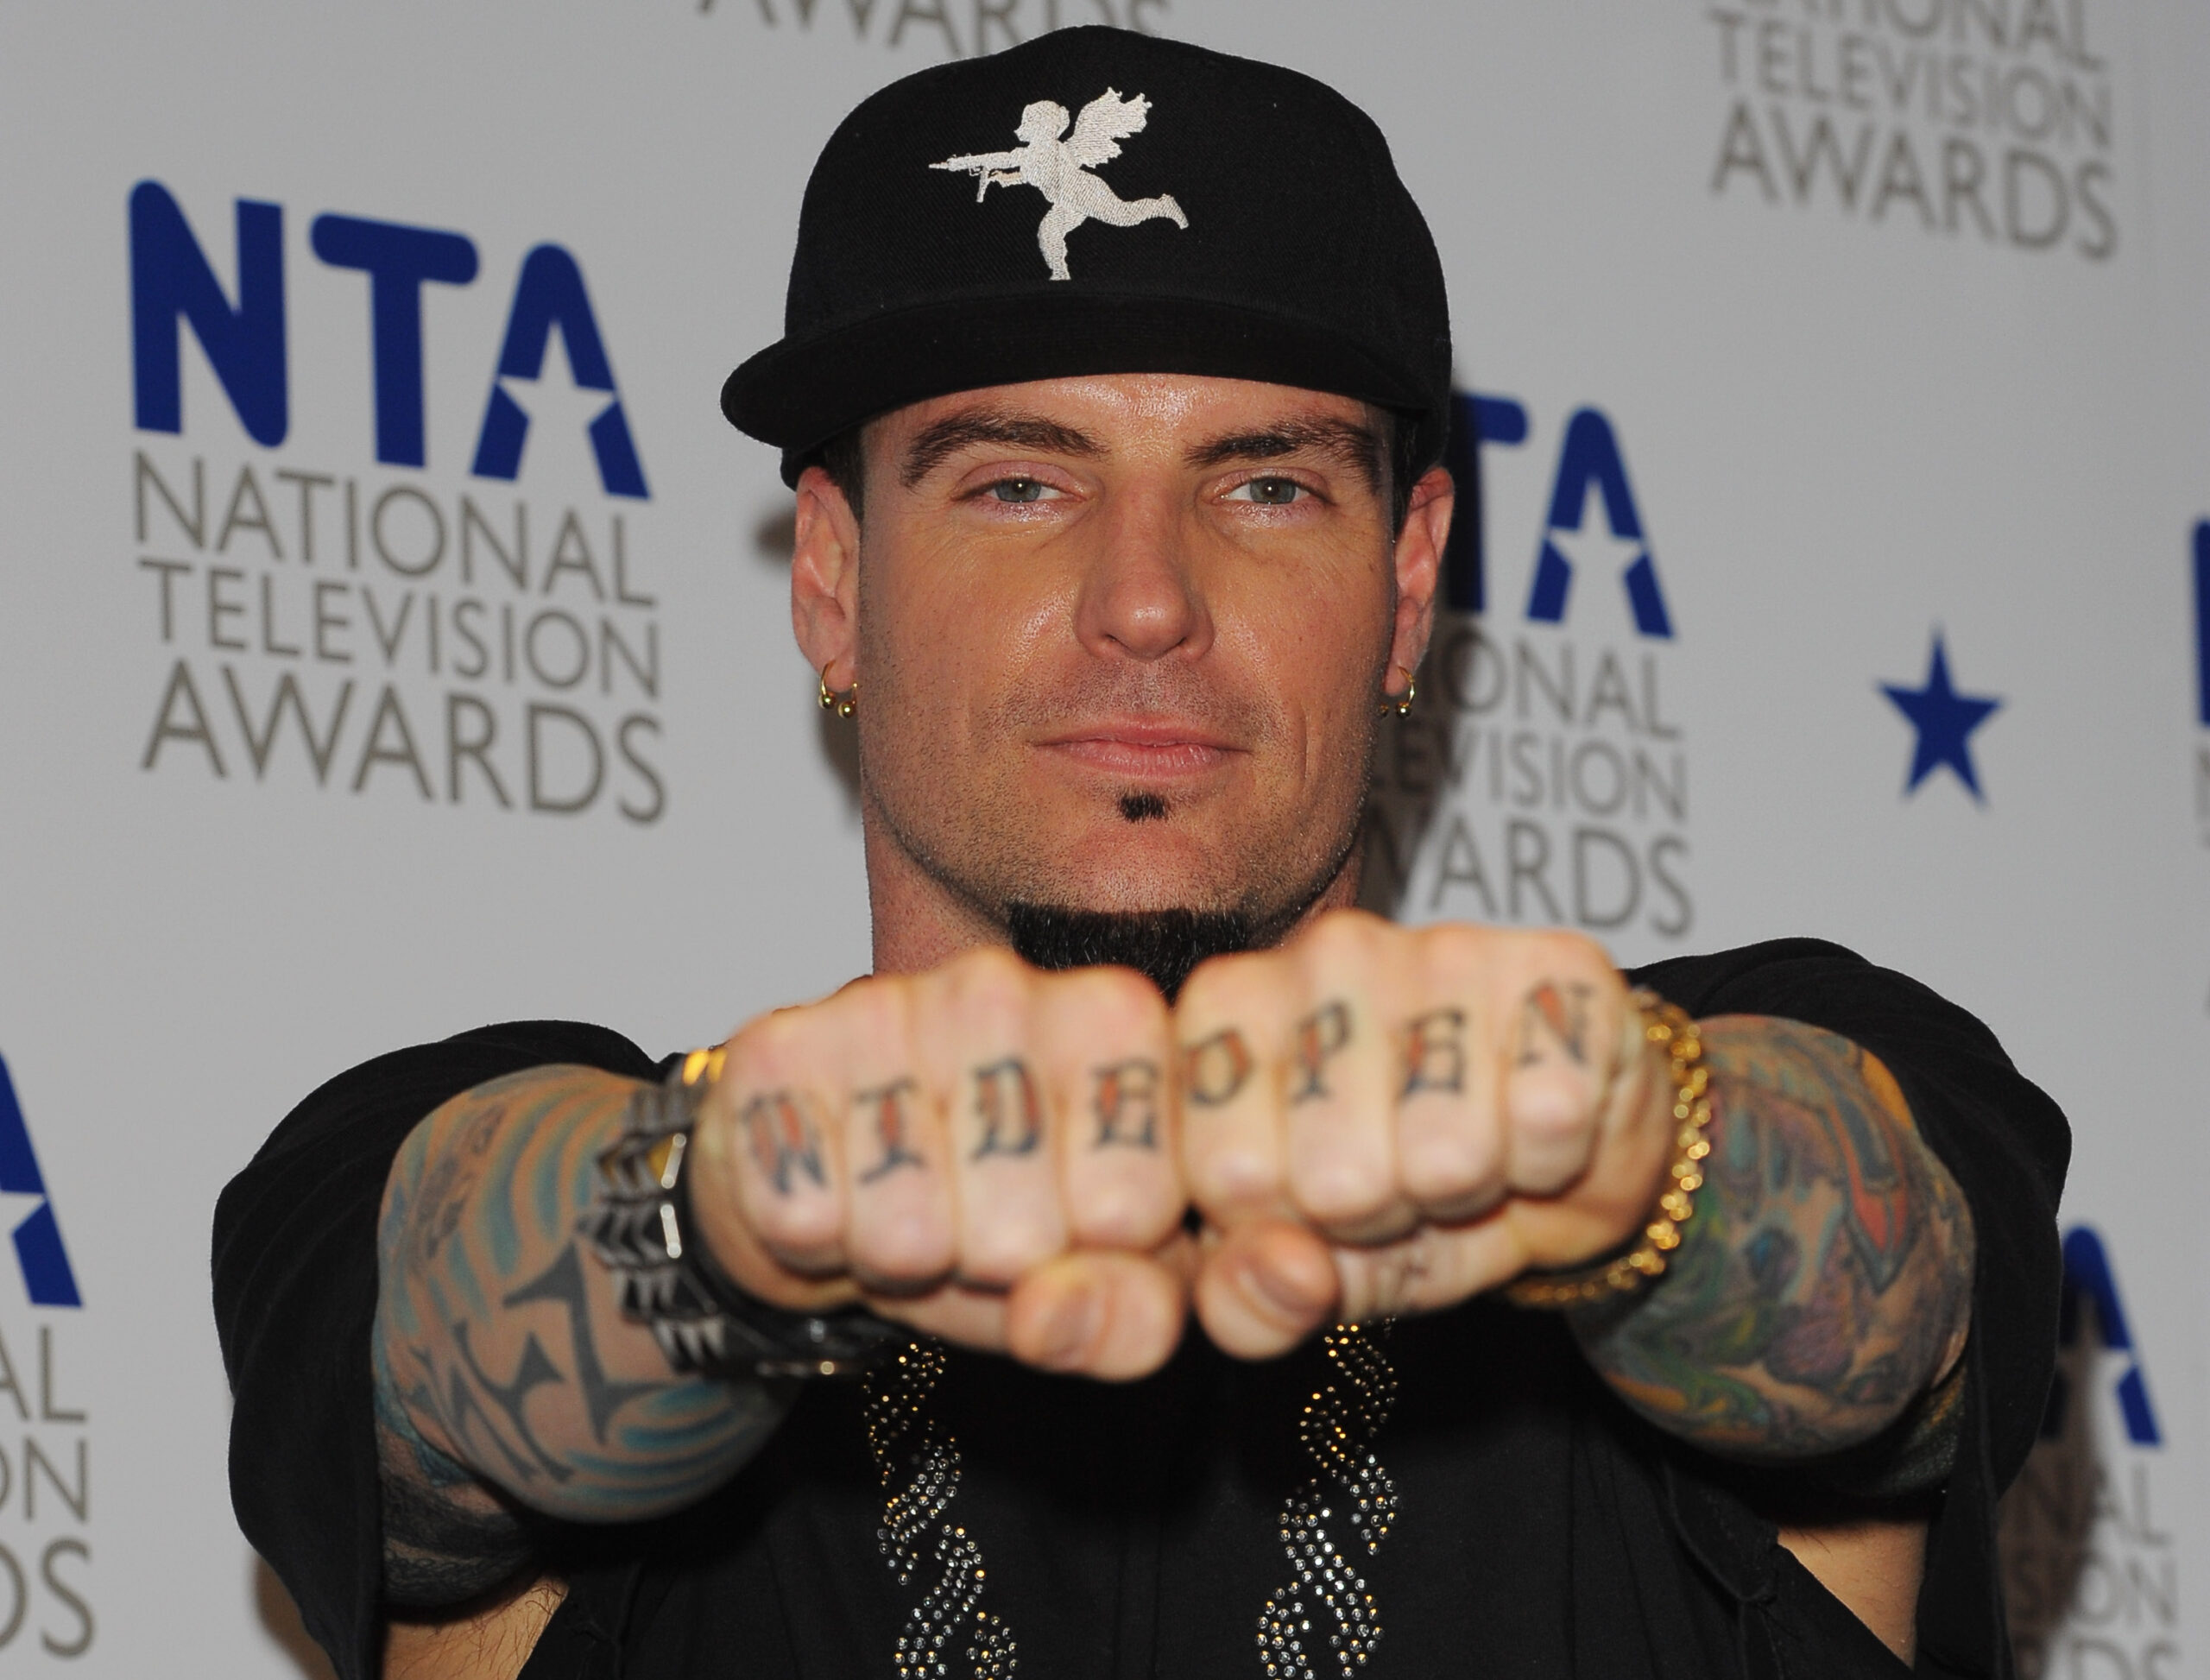 Vanilla Ice Cancels July 4th Concert In Texas After COVID-19 Backlash